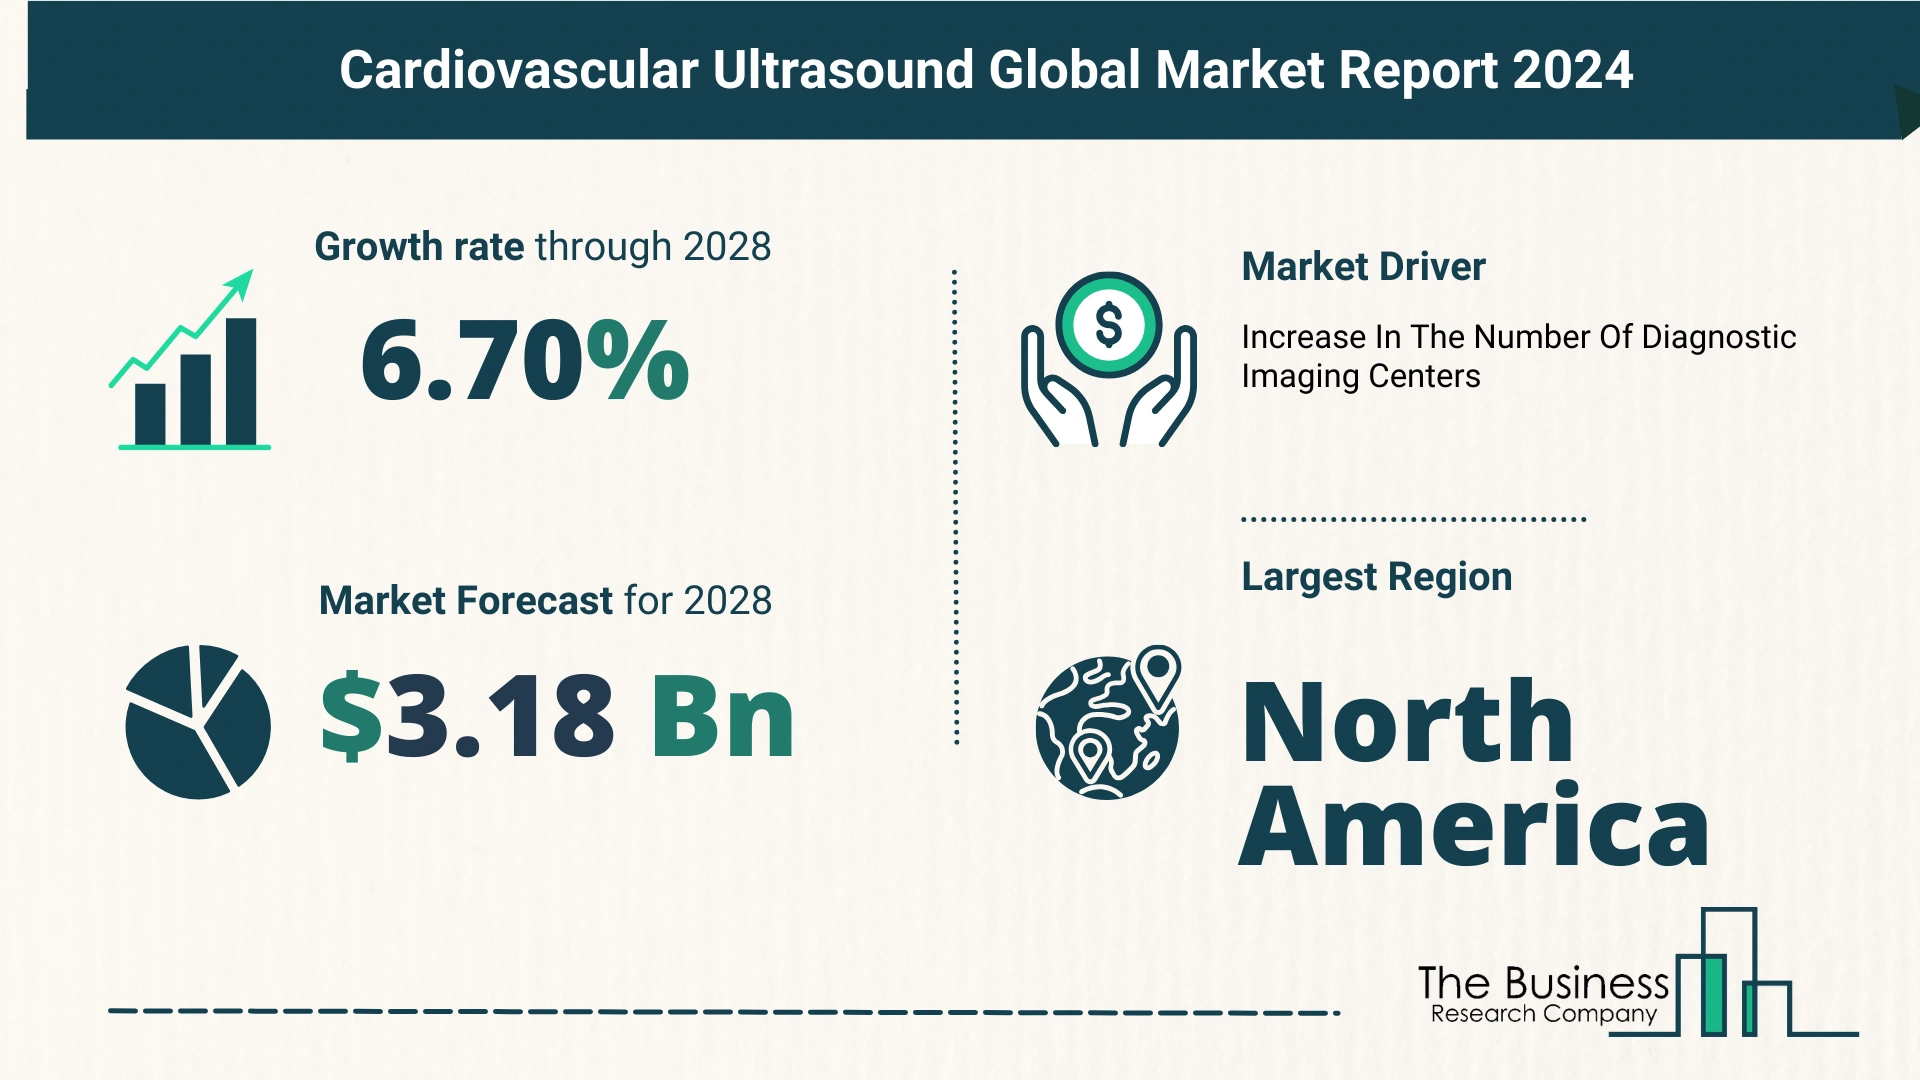 Key Insights On The Cardiovascular Ultrasound Market 2024 – Size, Driver, And Major Players